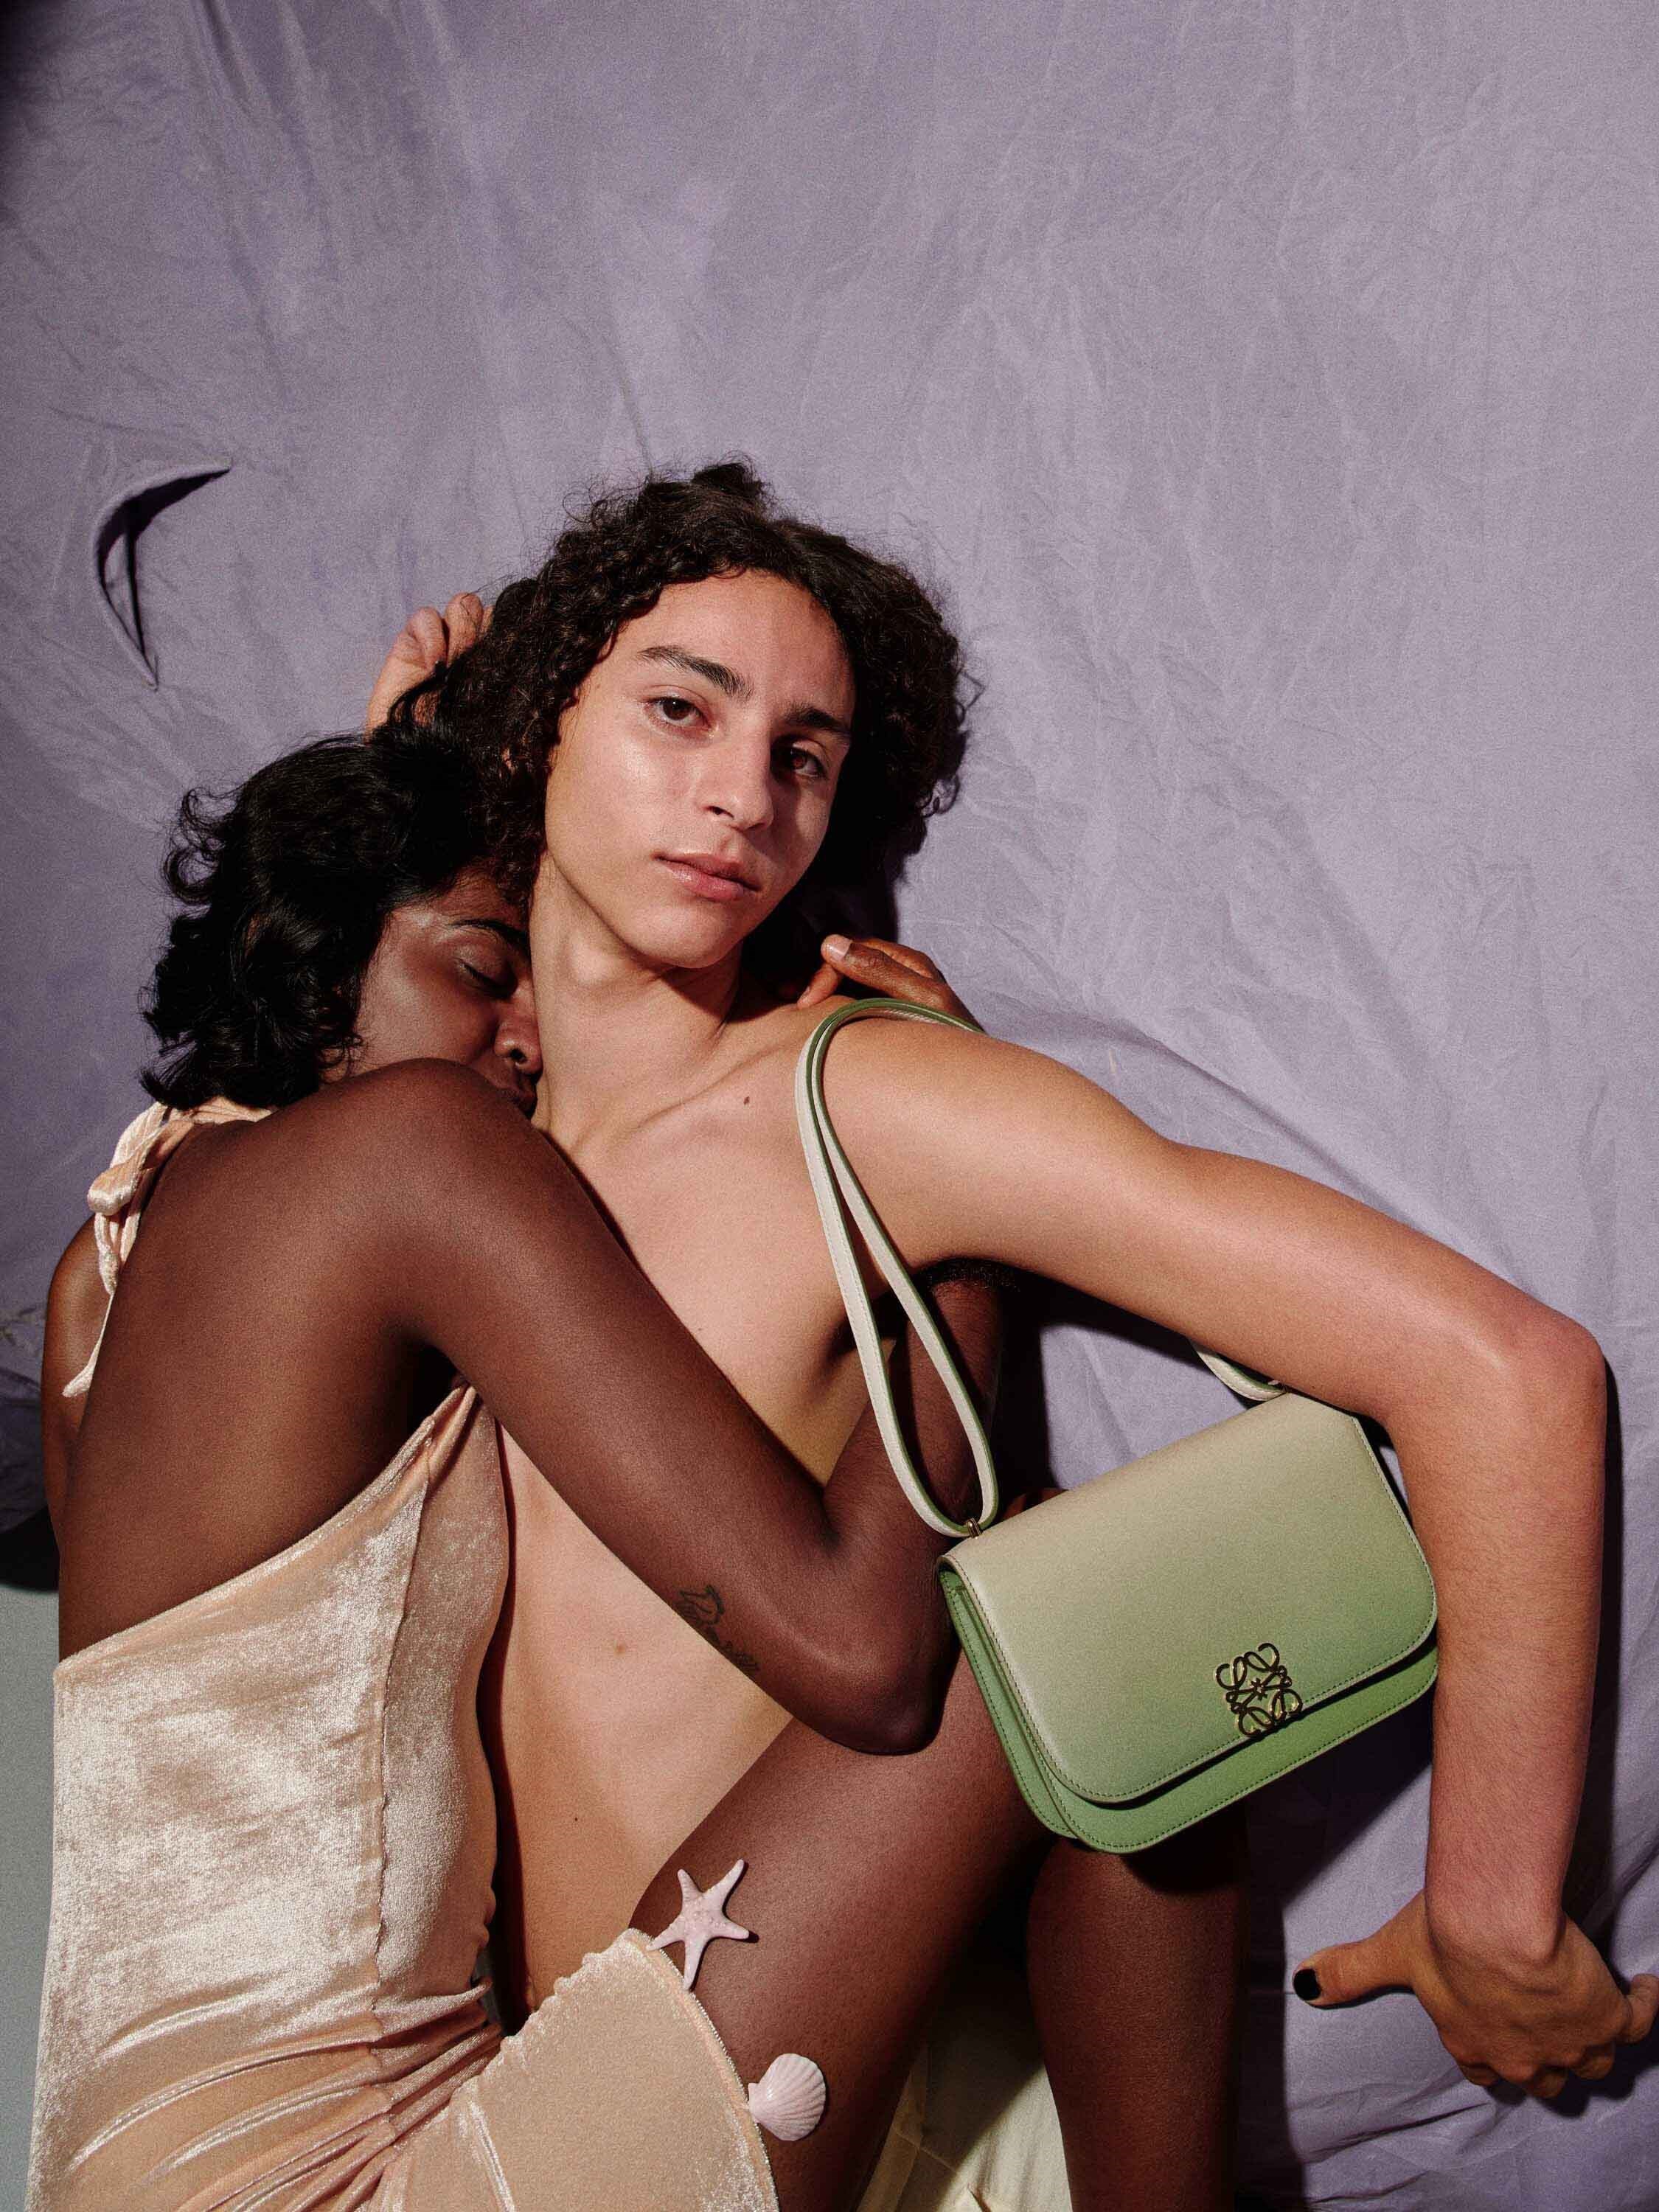 Jonathan Anderson gets personal with the new Loewe Paula's Ibiza collection